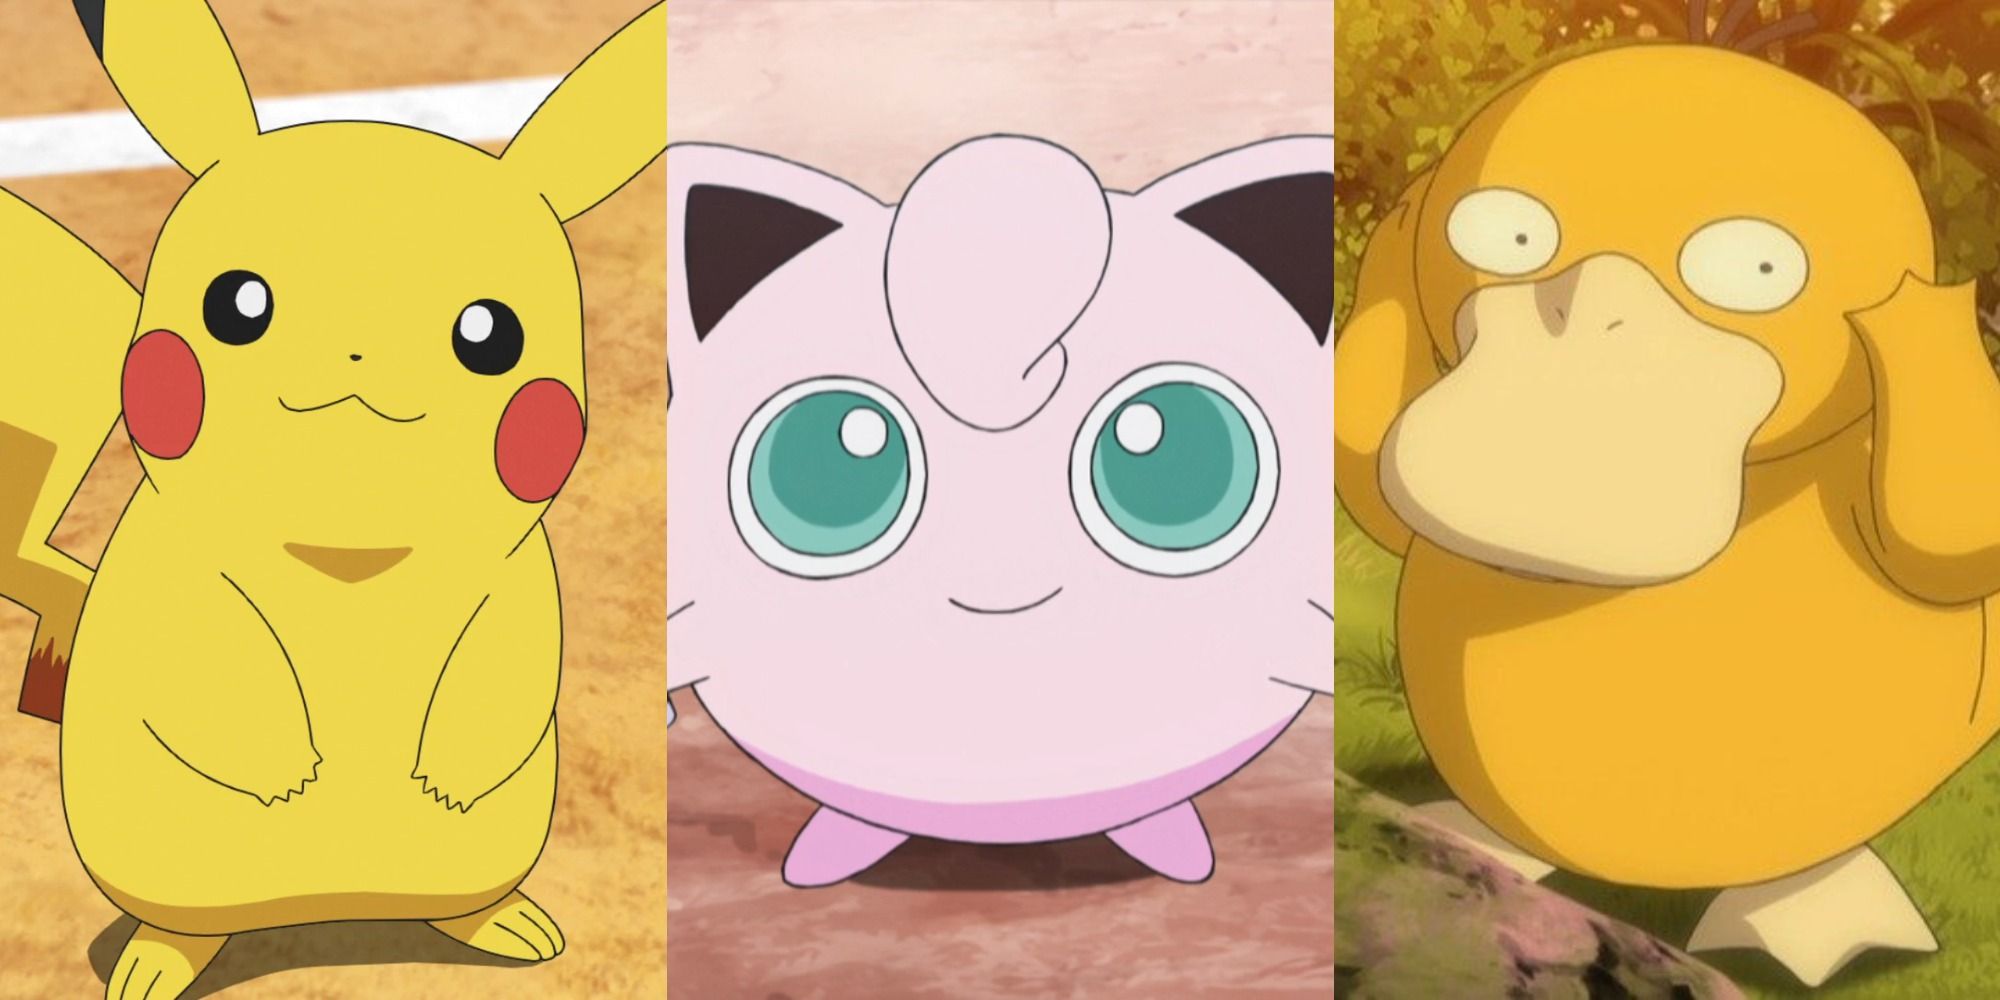 Split image showing Pikachu, Jigglypuff, and Psyduck in the Pokémon anime